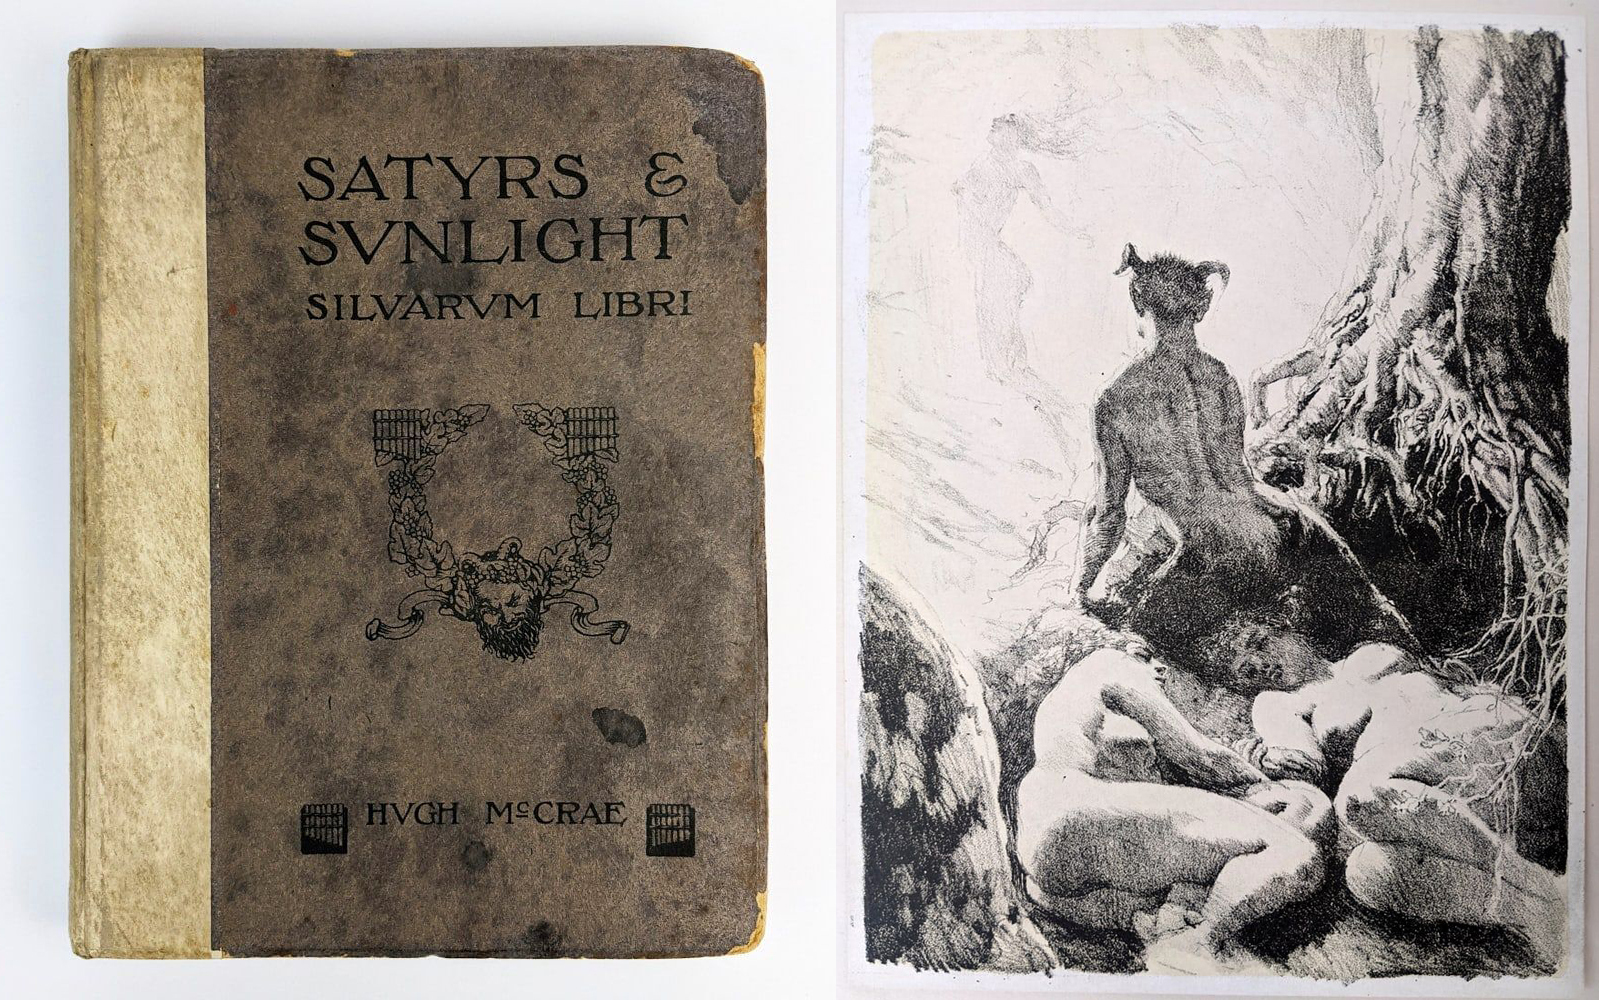 ‘Satyrs and Sunlight’ by Hugh McRae with illustrations by Norman Lindsay, which hammered for A$1,500 and sold for A$1,830 ($1,220) with buyer’s premium at The Book Merchant Jenkins.